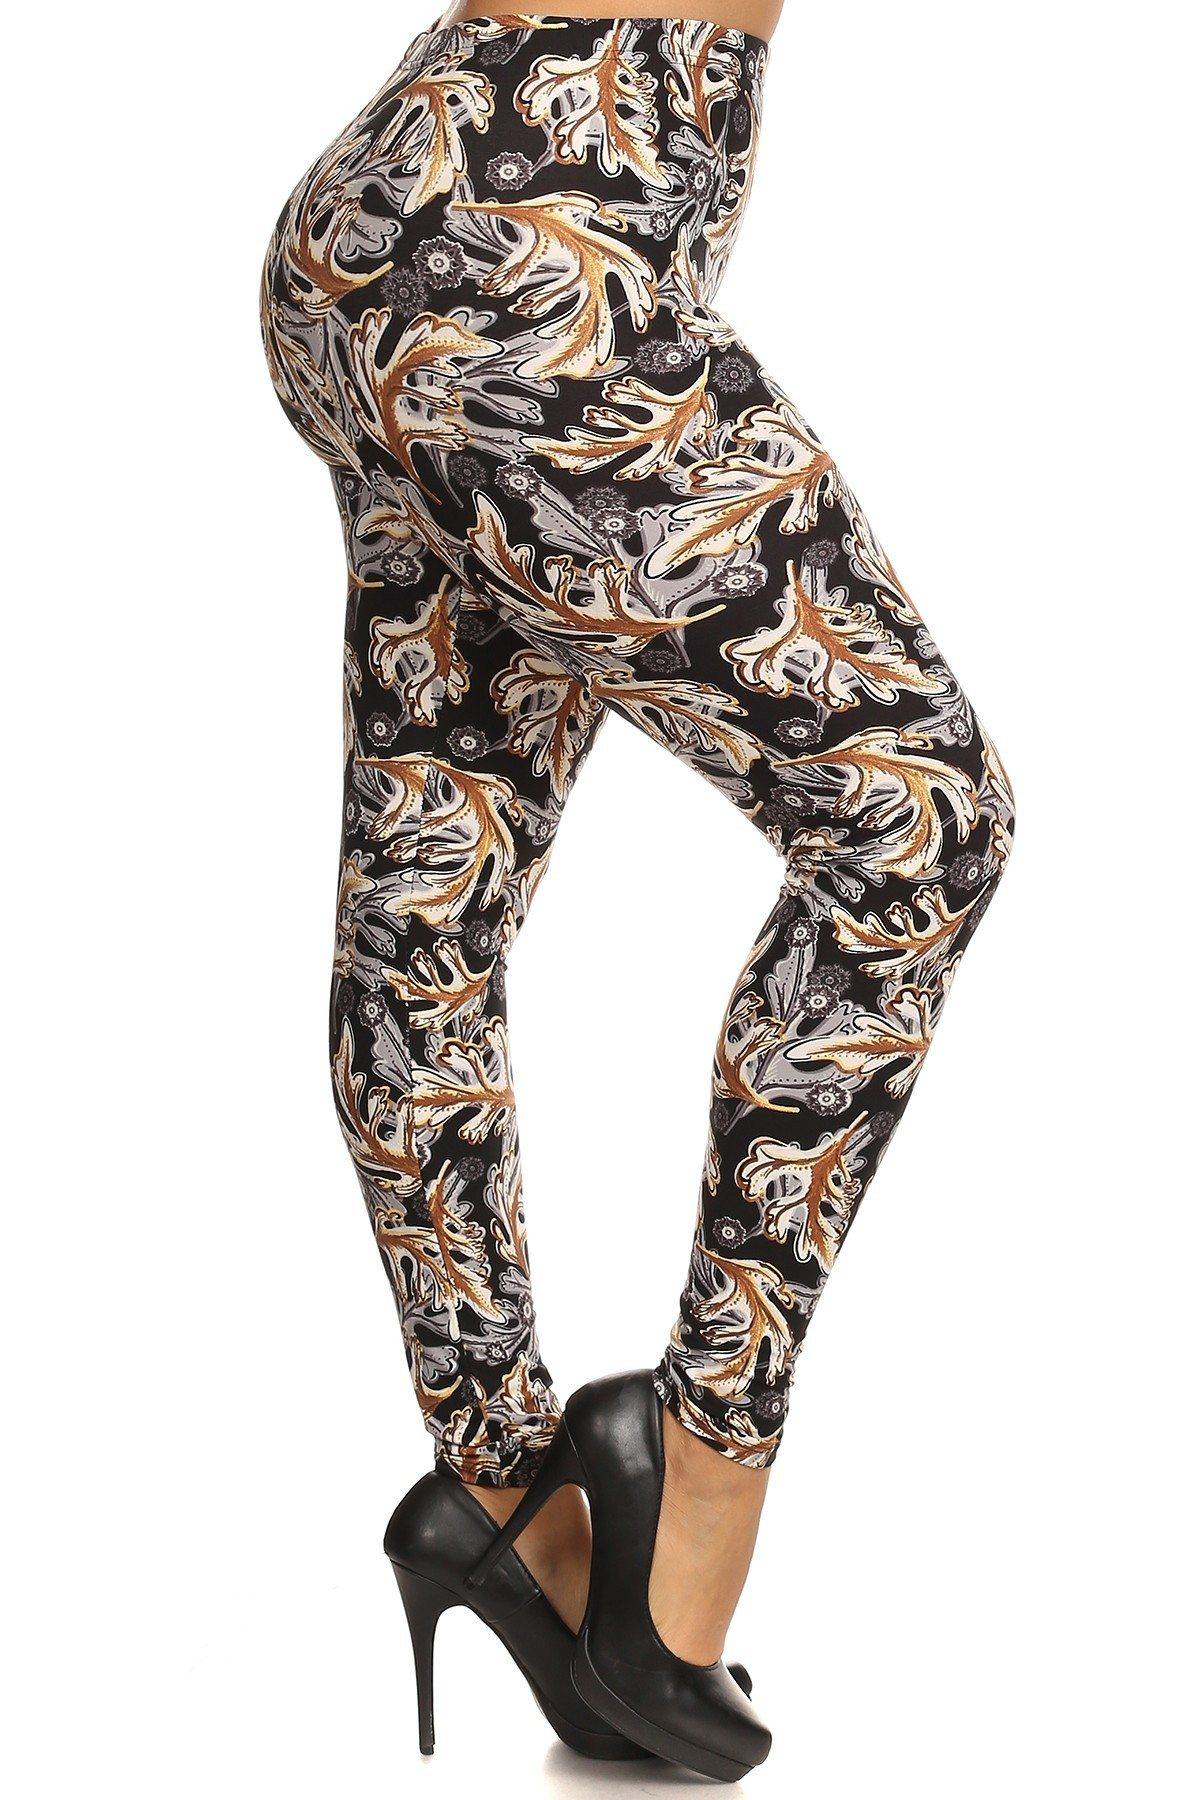 Abstract Leaf Print, Full Length Leggings In A Slim Fitting Style With A Banded High Waist - Pearlara